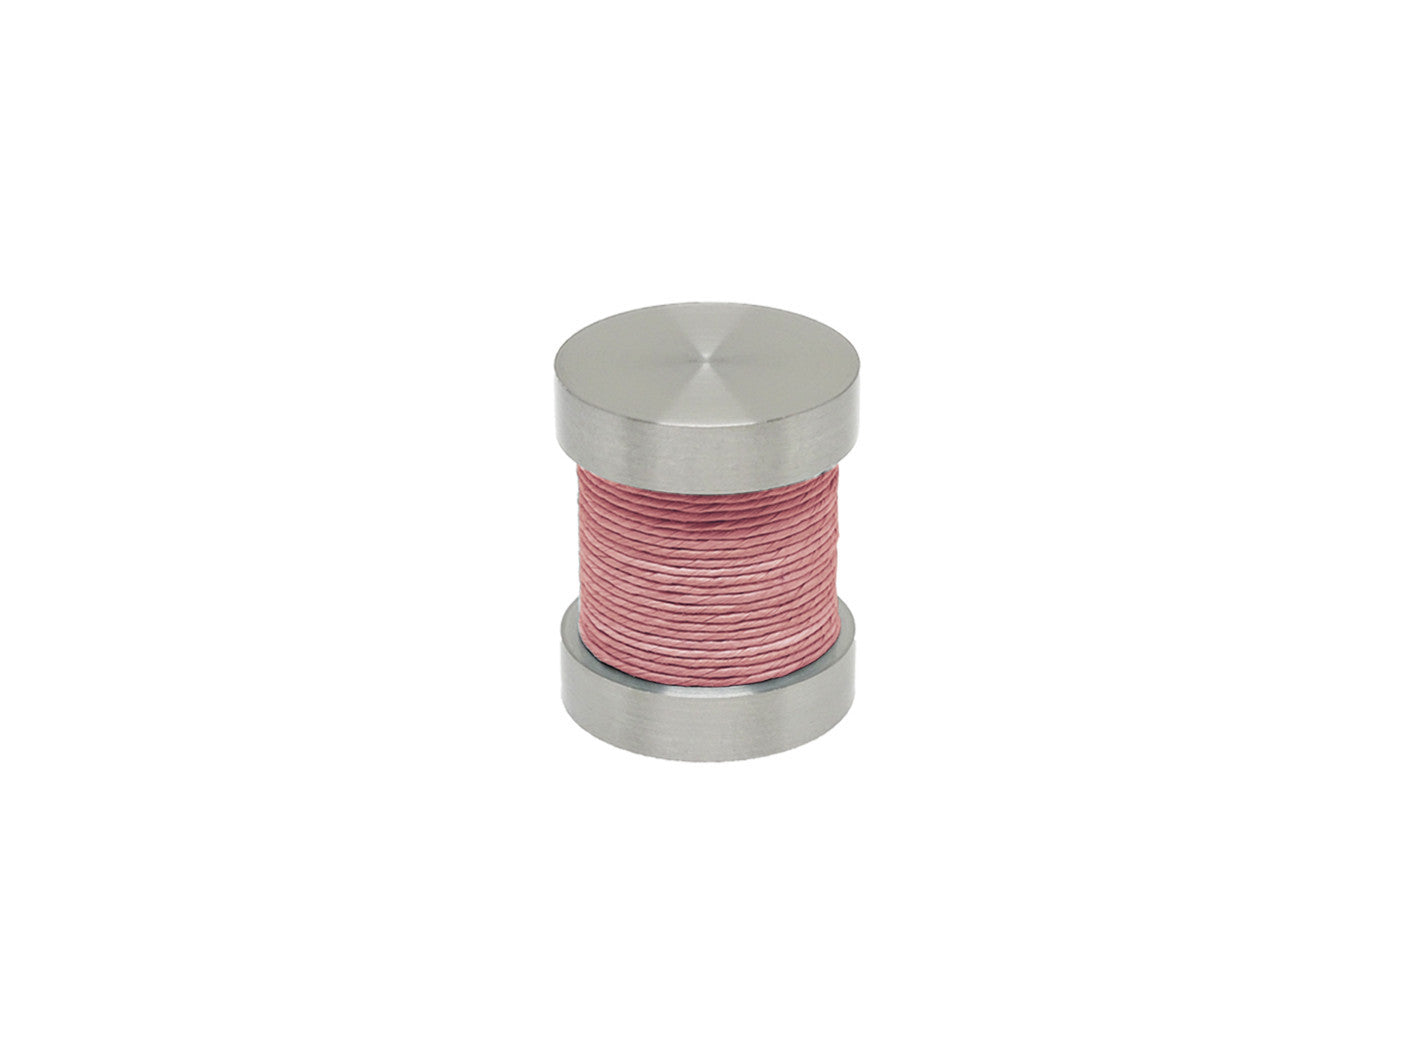 Blossom pink coloured twine groove finial | Walcot House 30mm stainless steel collection